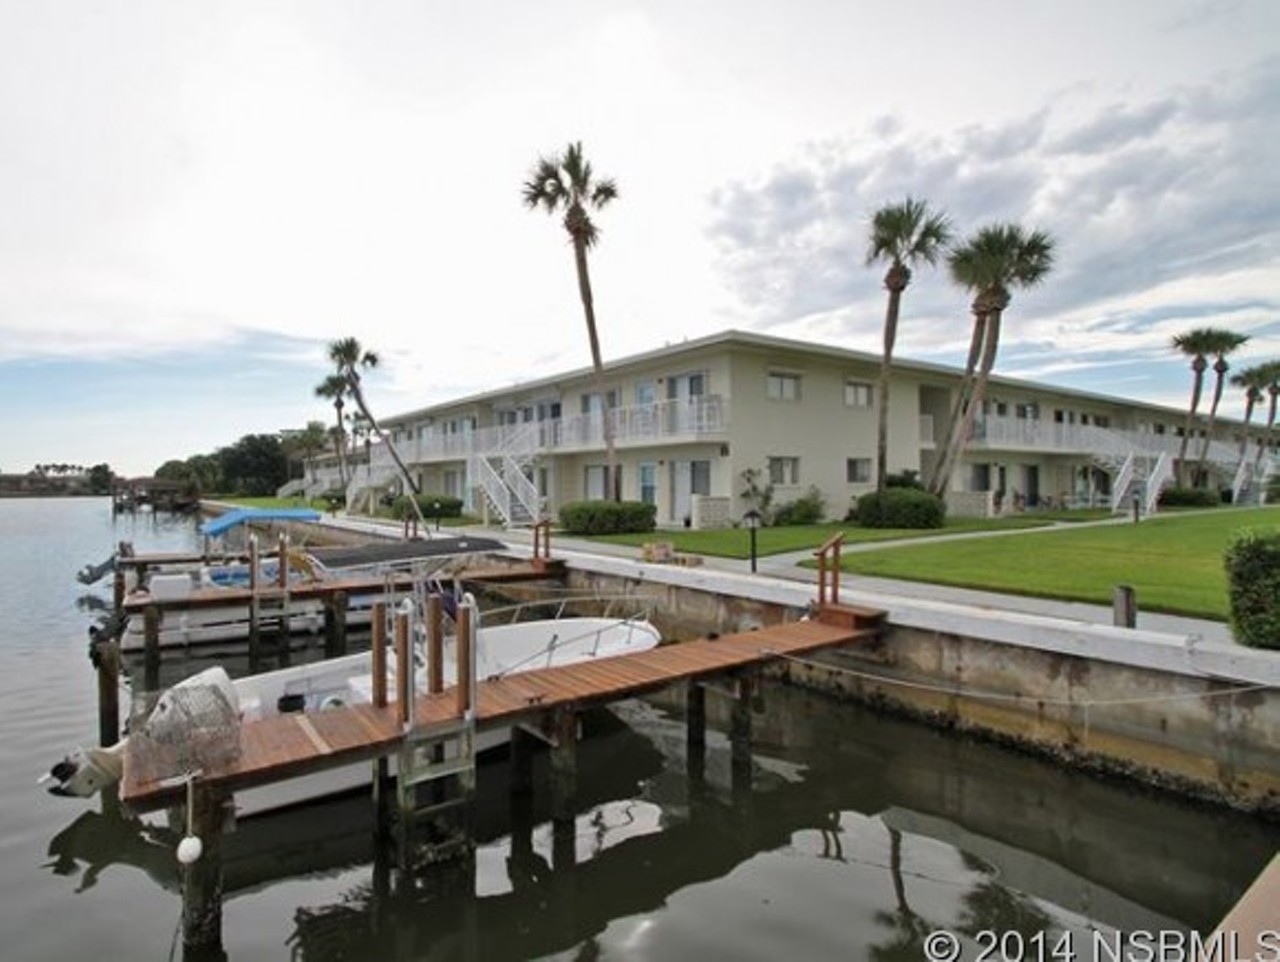 335 N. Causeway Unit C21, New Smyrna Beach
For $104,500, you could own this remodeled condo with river access a few blocks away from Flagler Avenue.